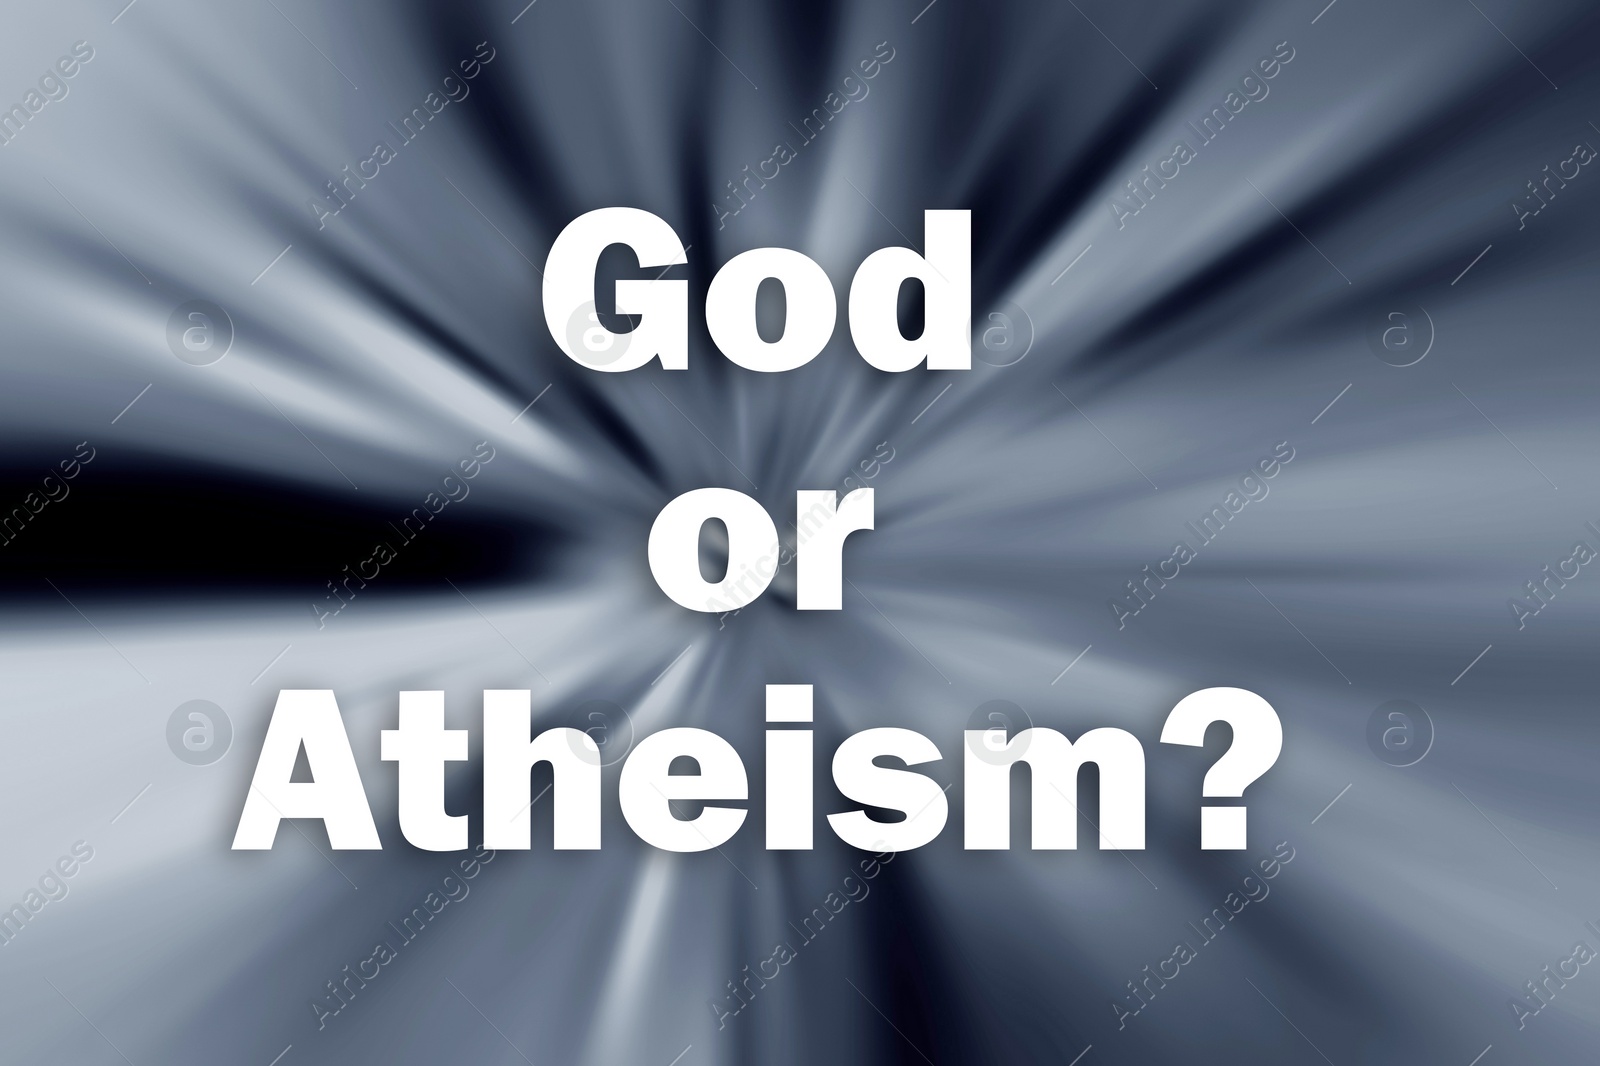 Illustration of Question God Or Atheism on blurred background